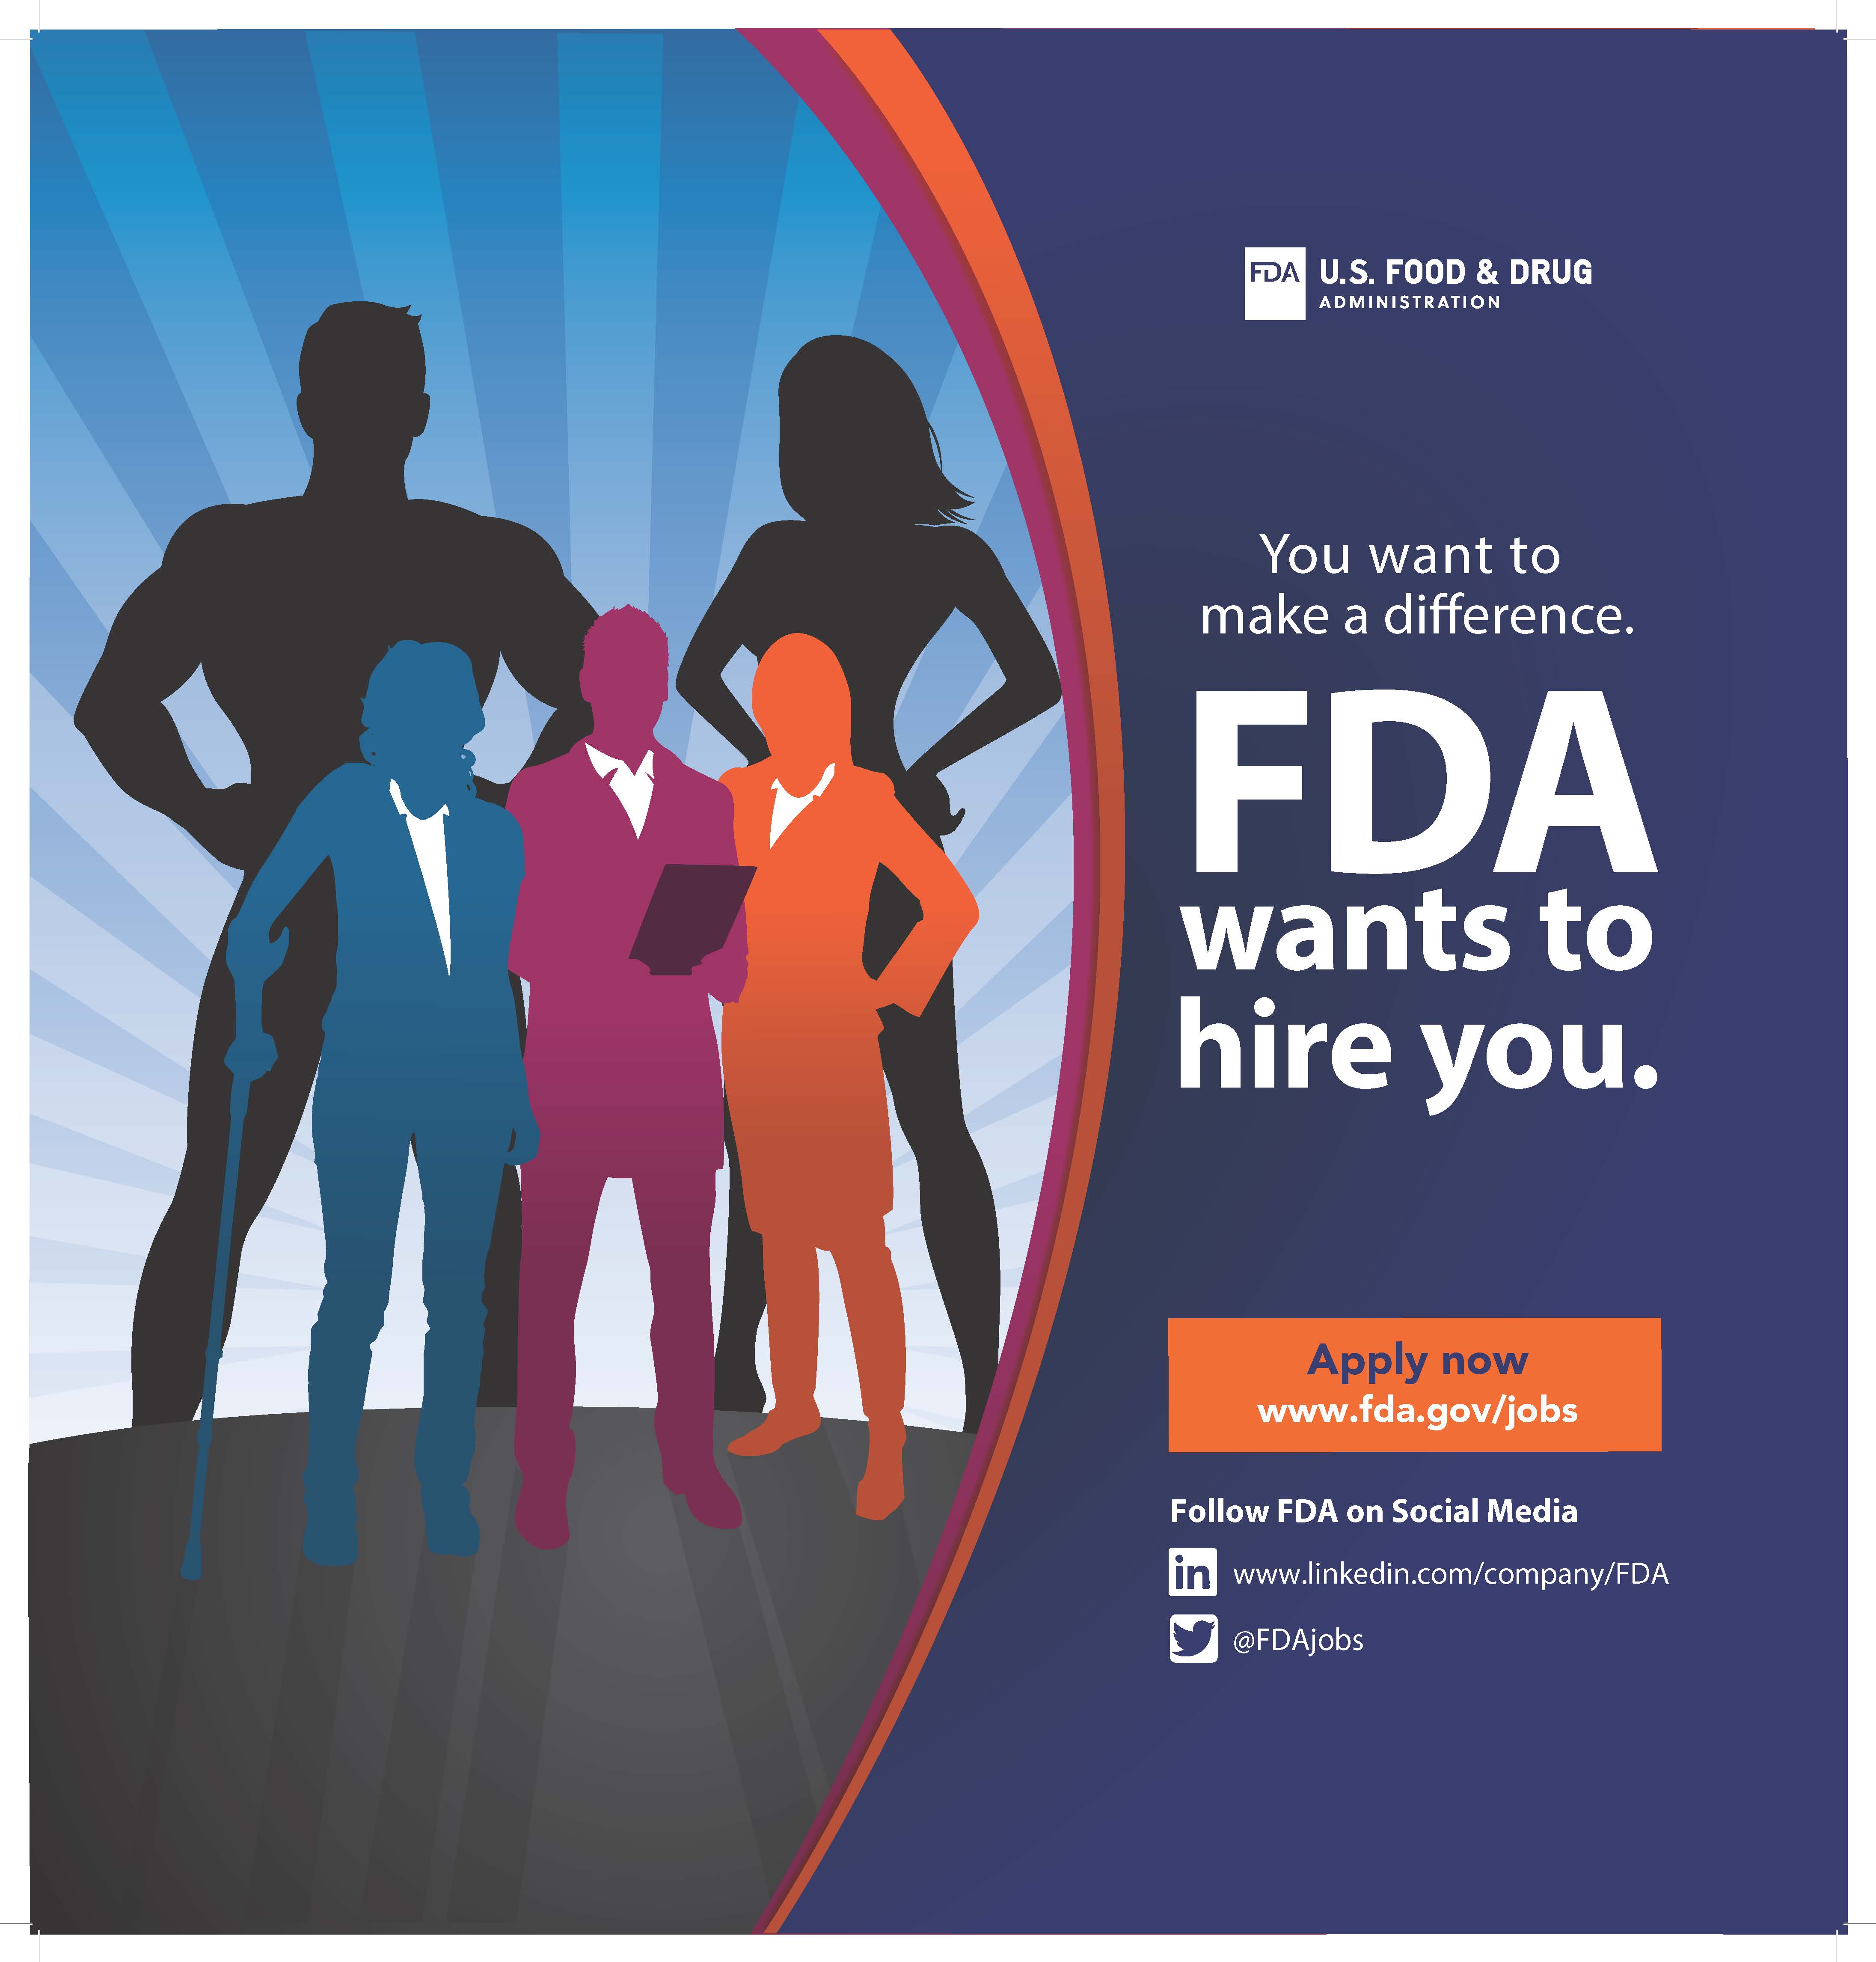 Recruitment Graphic - You want to make a difference. FDA wants to hire you.